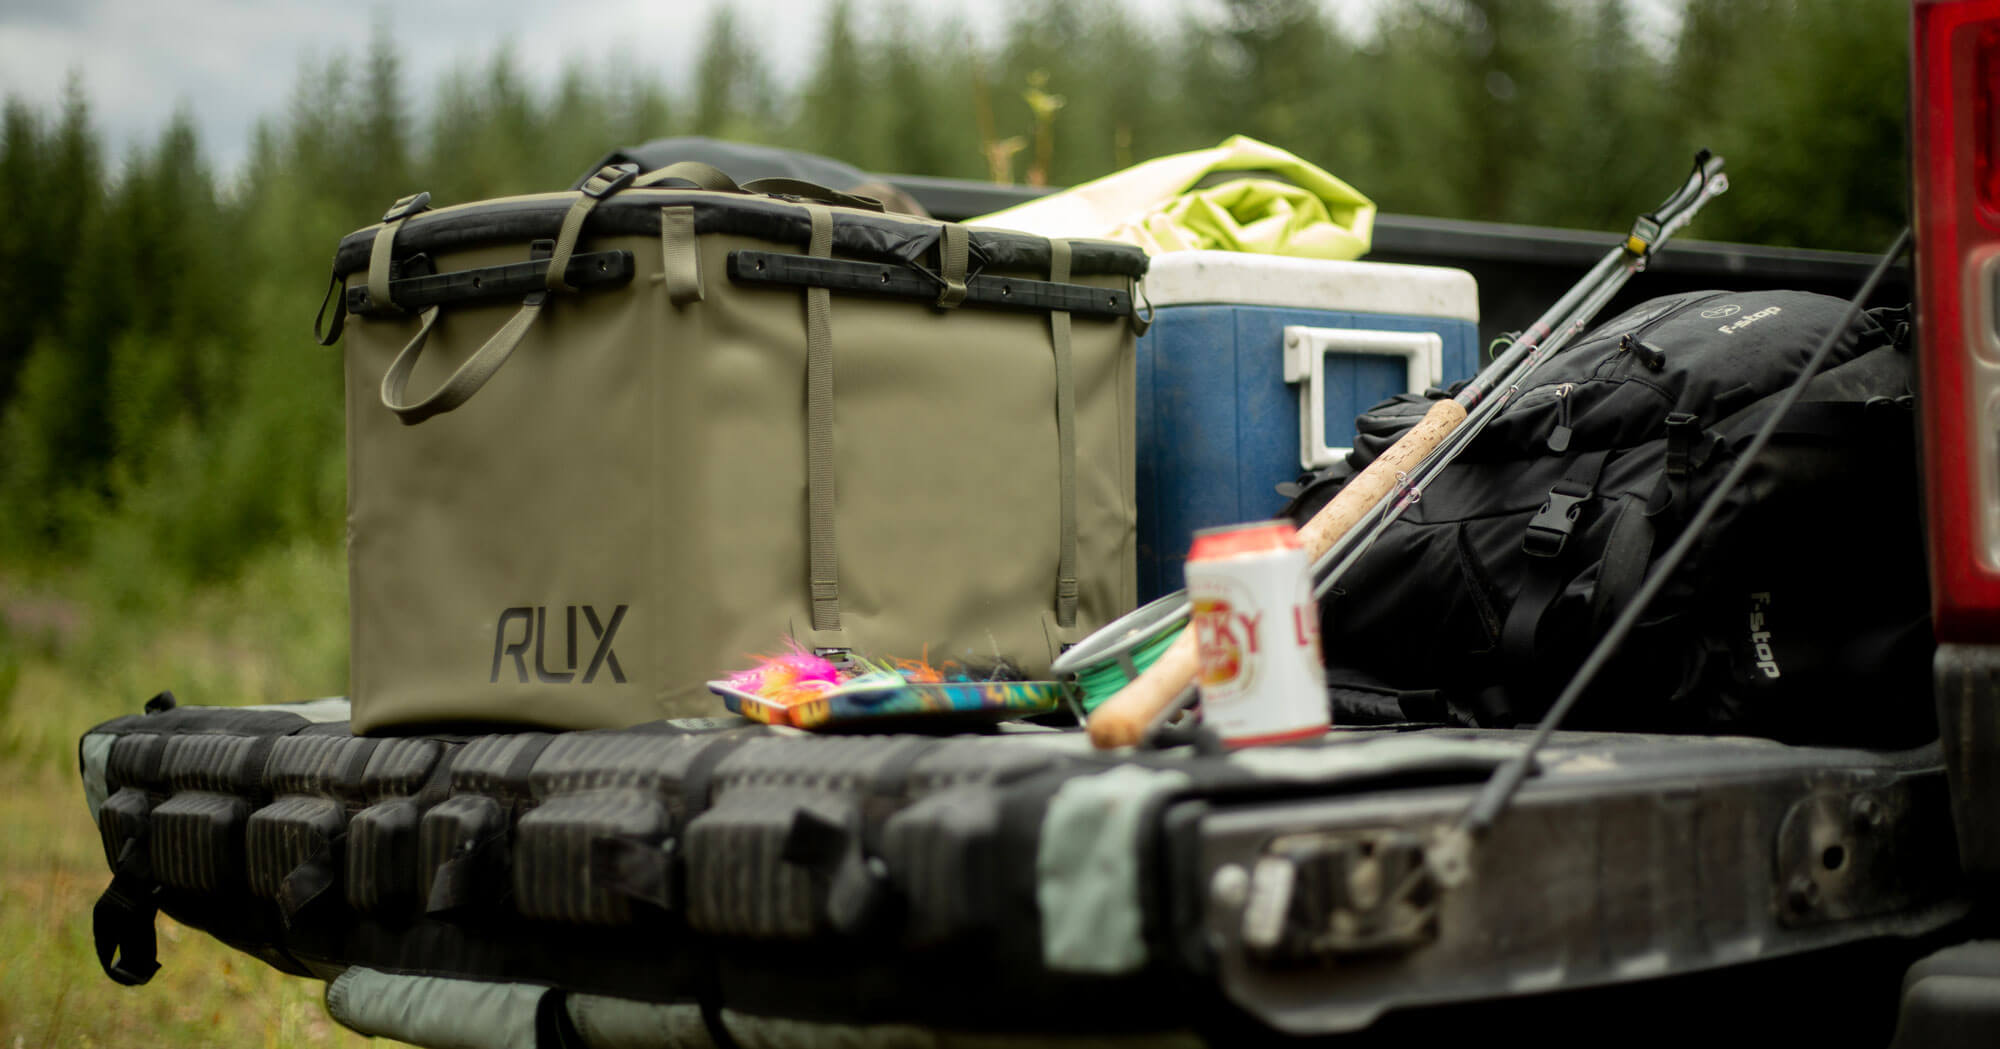 RUX 70L on a truck bed with fishing gear. 